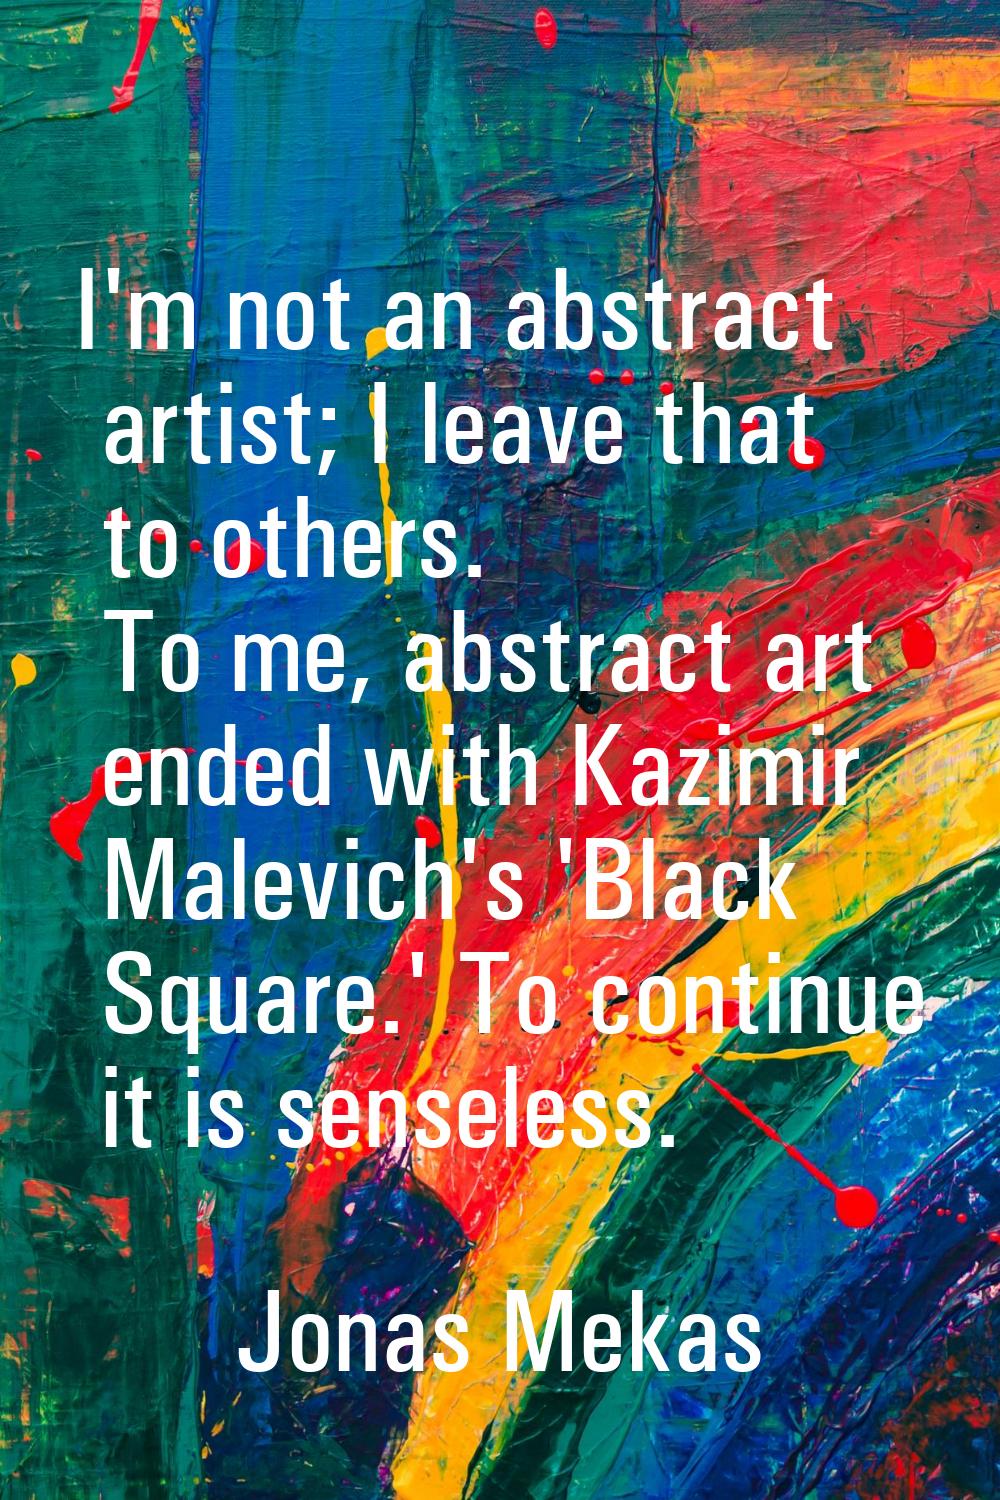 I'm not an abstract artist; I leave that to others. To me, abstract art ended with Kazimir Malevich